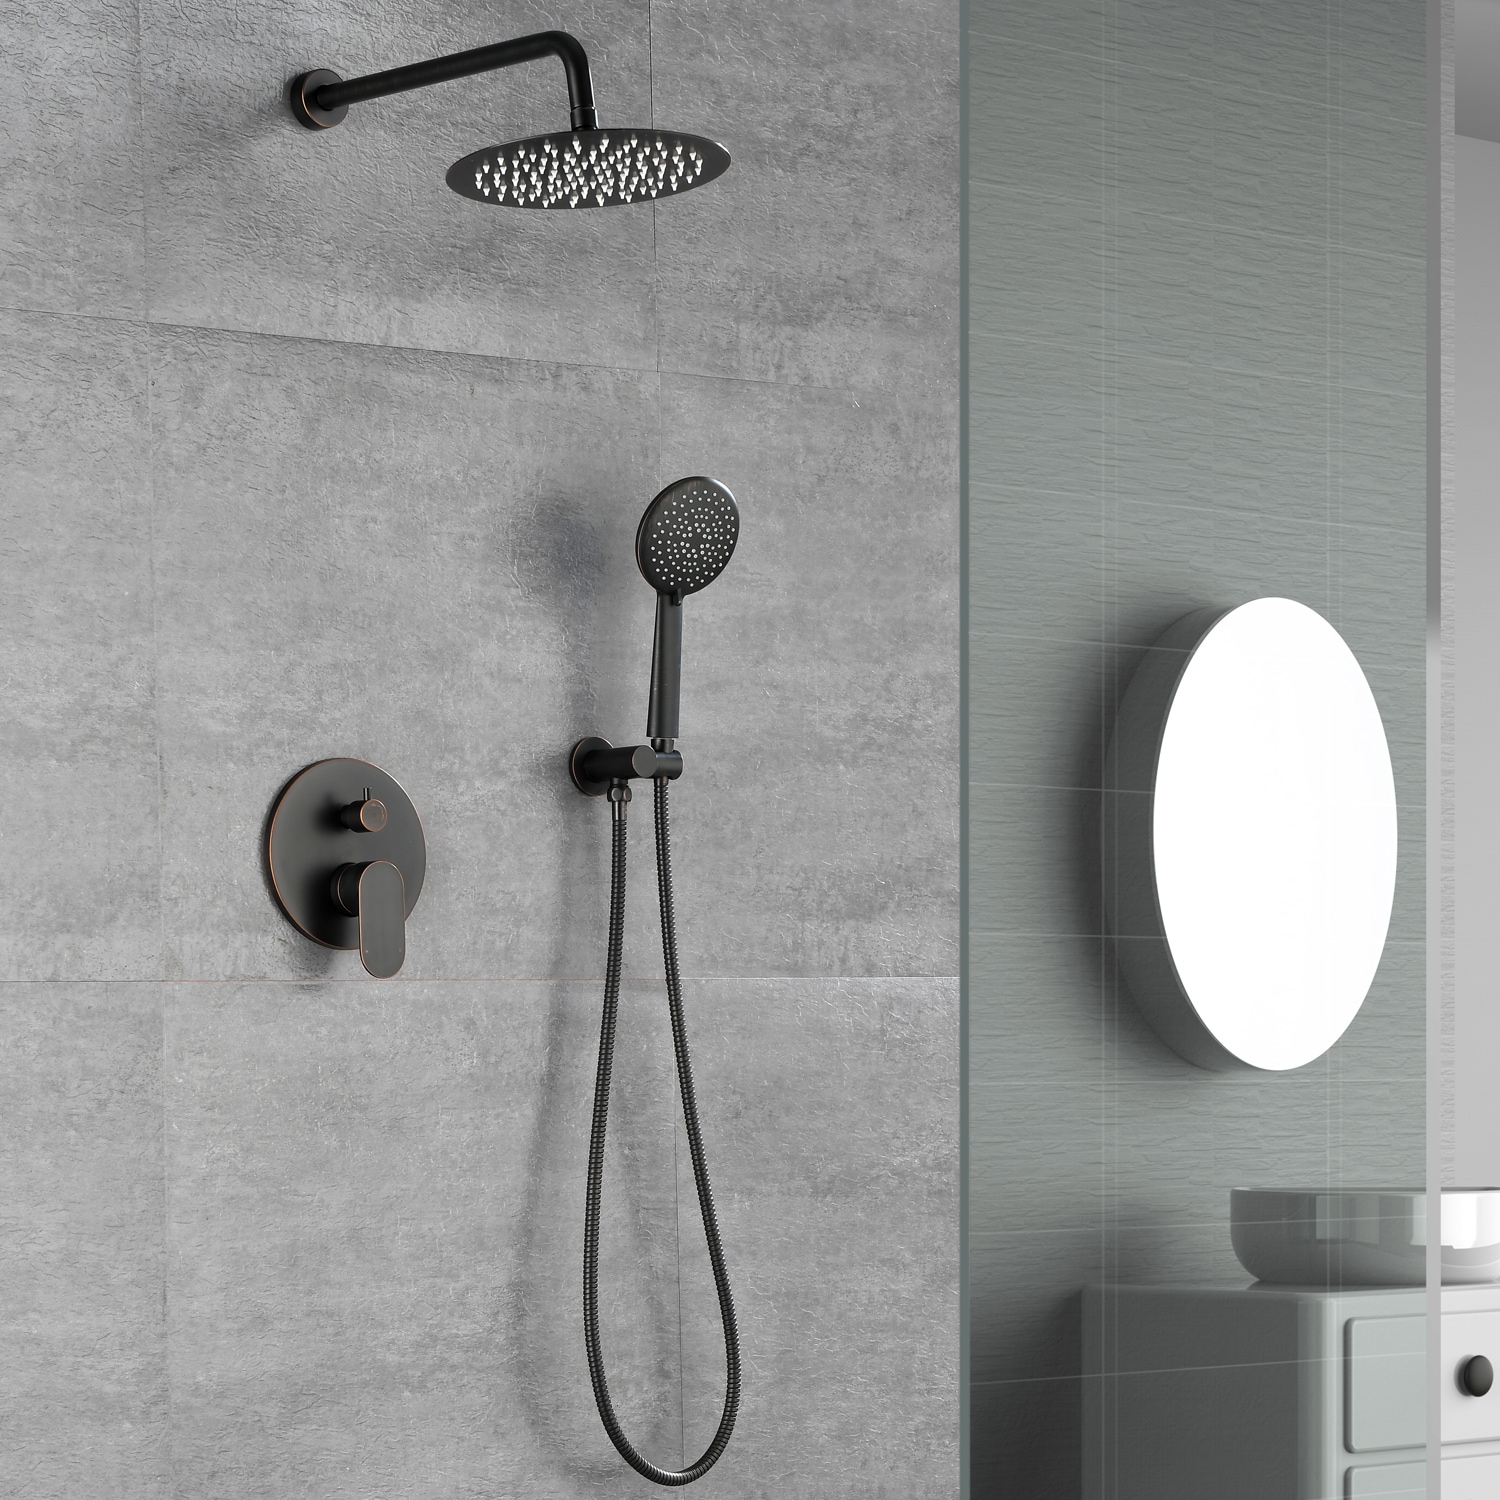 Pouuin Ob Oil Rubbed Bronze Waterfall Built-In Shower Faucet System with 2-way Diverter Valve Included